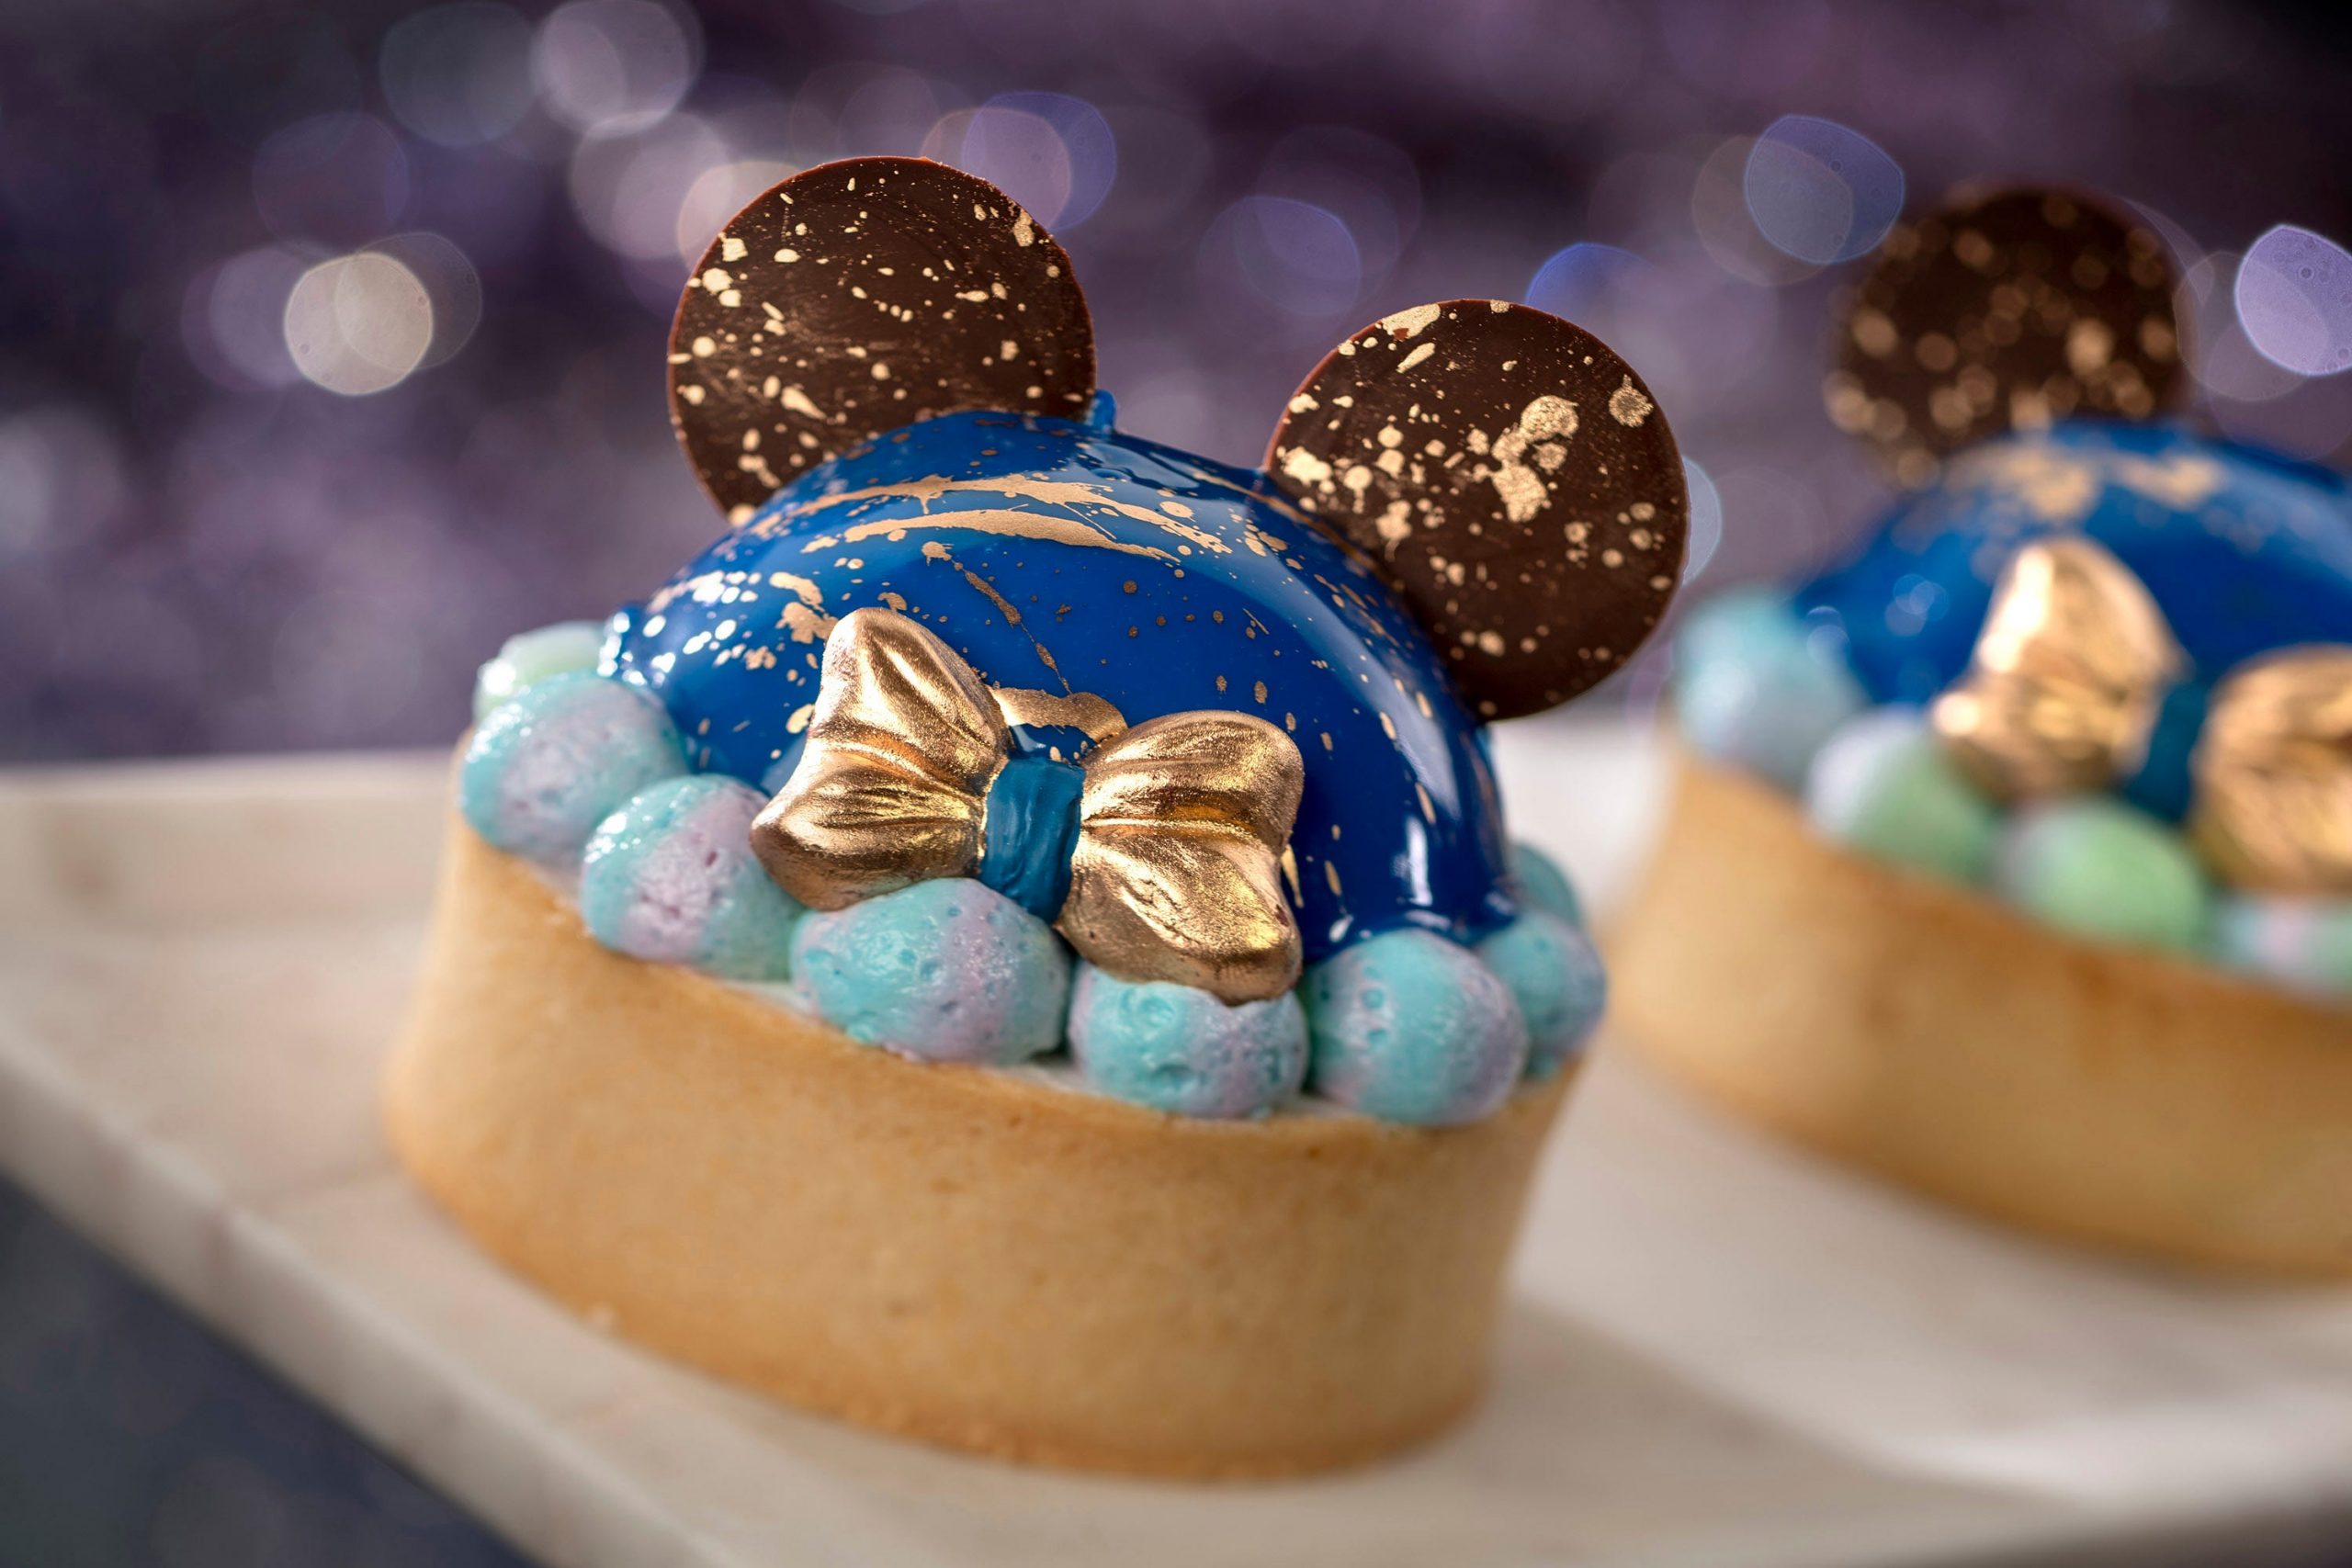 One of Disney's culinary creations, which is a small sponge cake with a blue and gold mouse head outline on top.